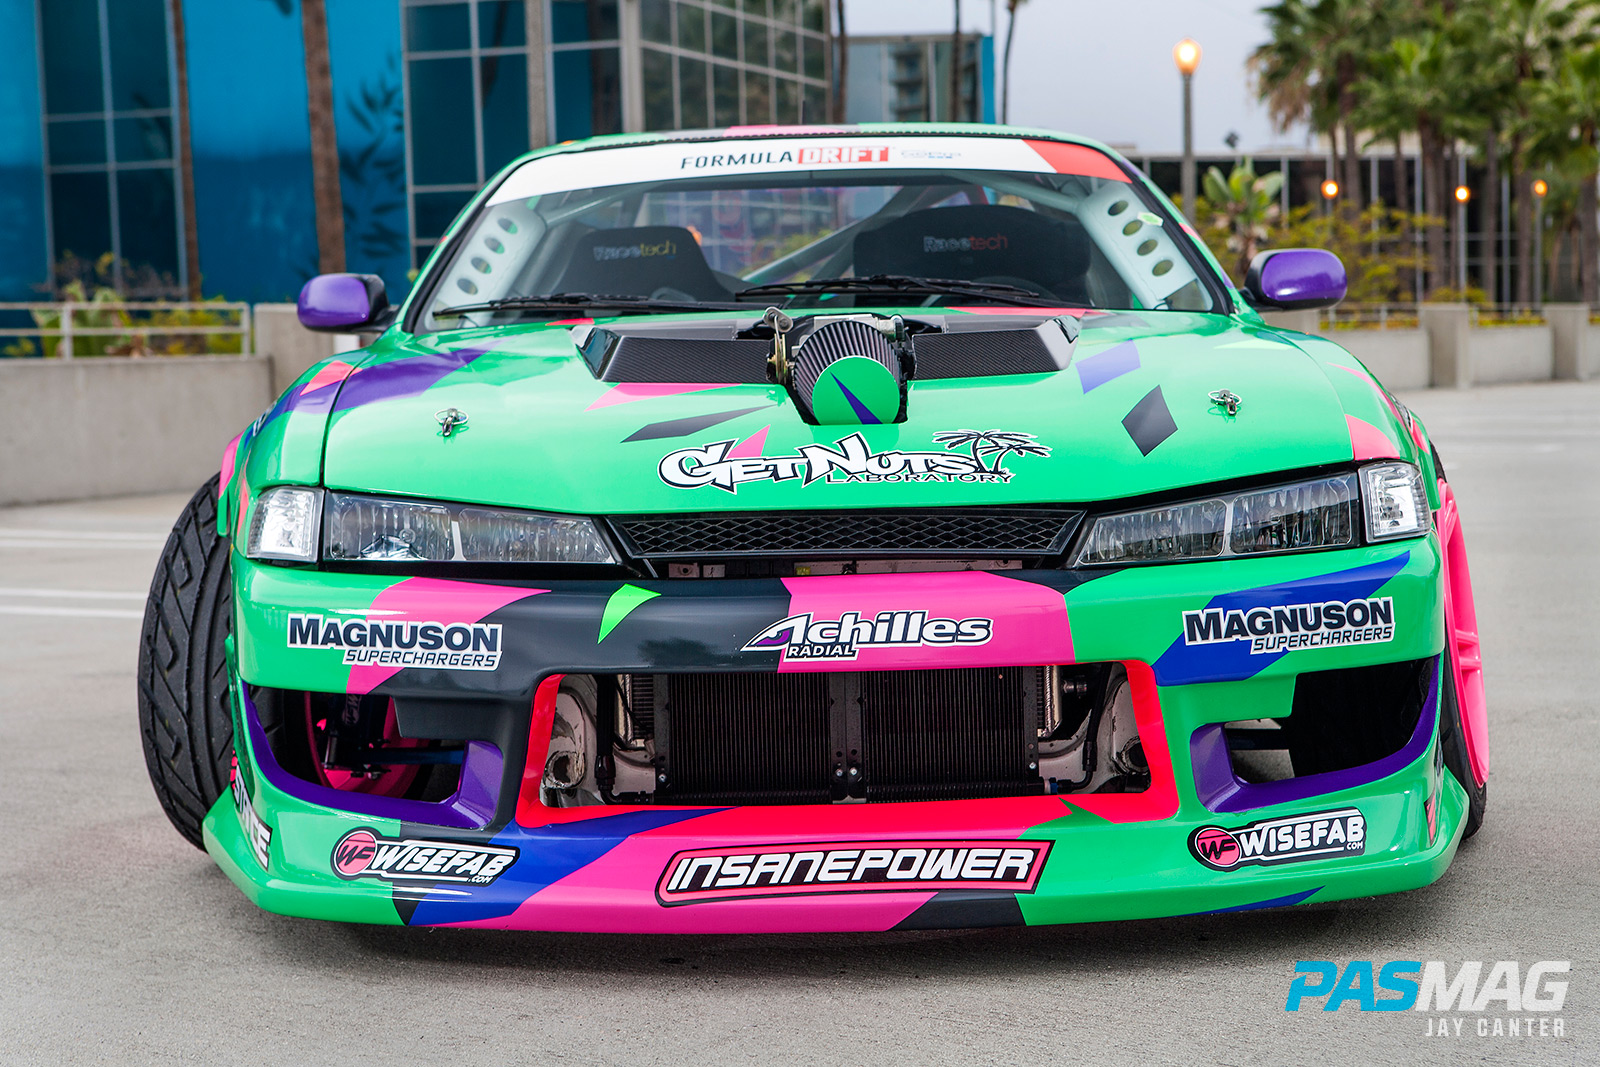 Alec Hohnadell 1995 Nissan 240sx S14 PASMAG canter 5